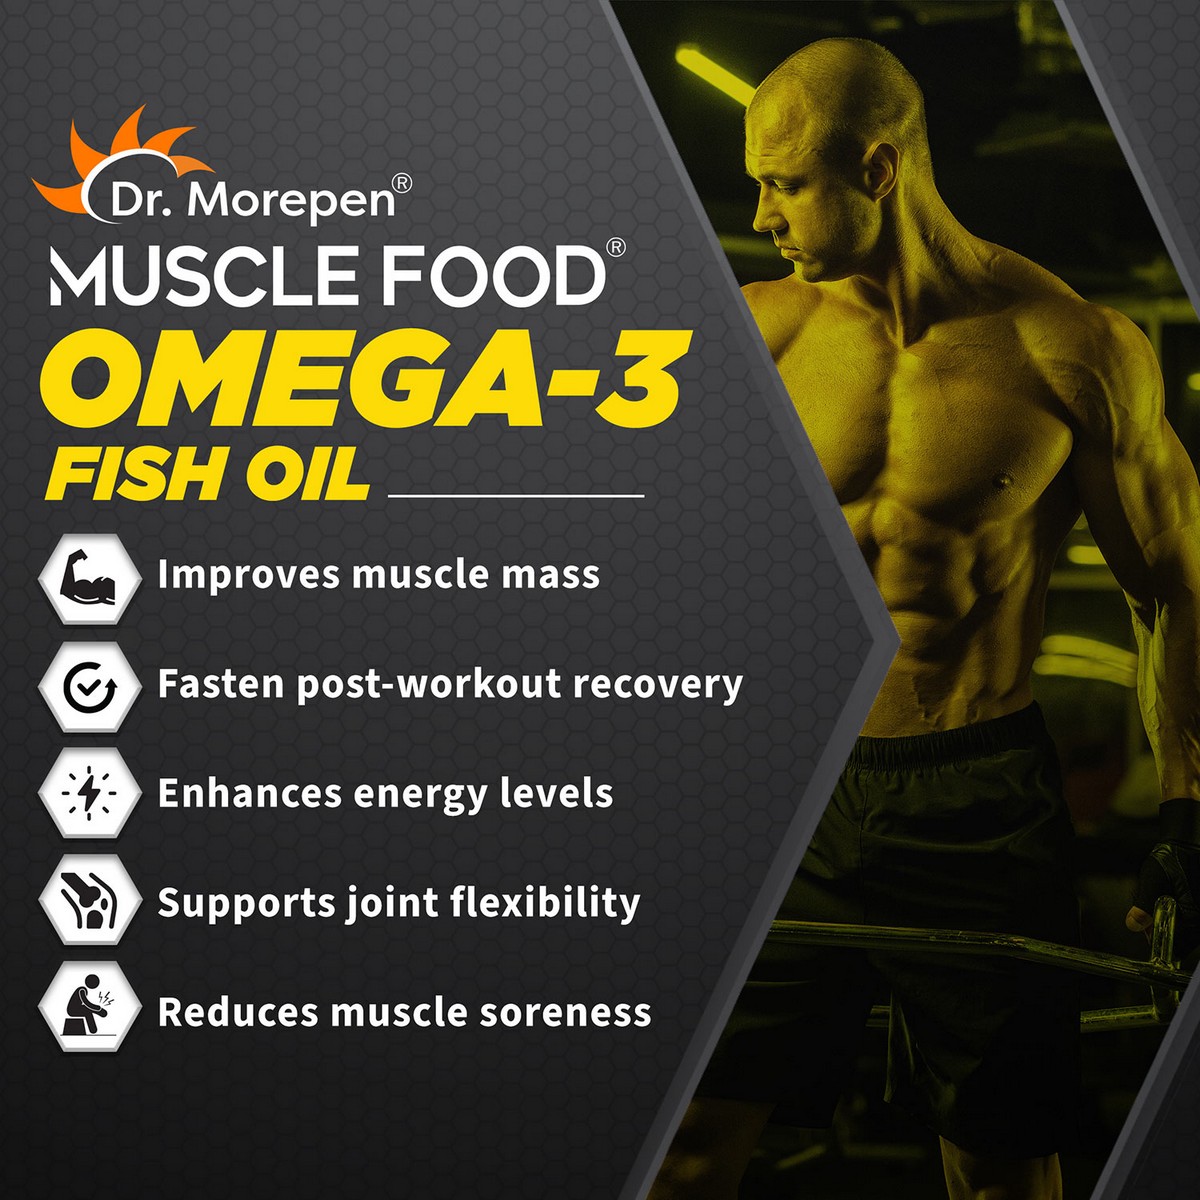 Dr. Morepen Musclefood Omega 3 2000mg Fish Oil Softgels Buy 1 Get 1 Free 3